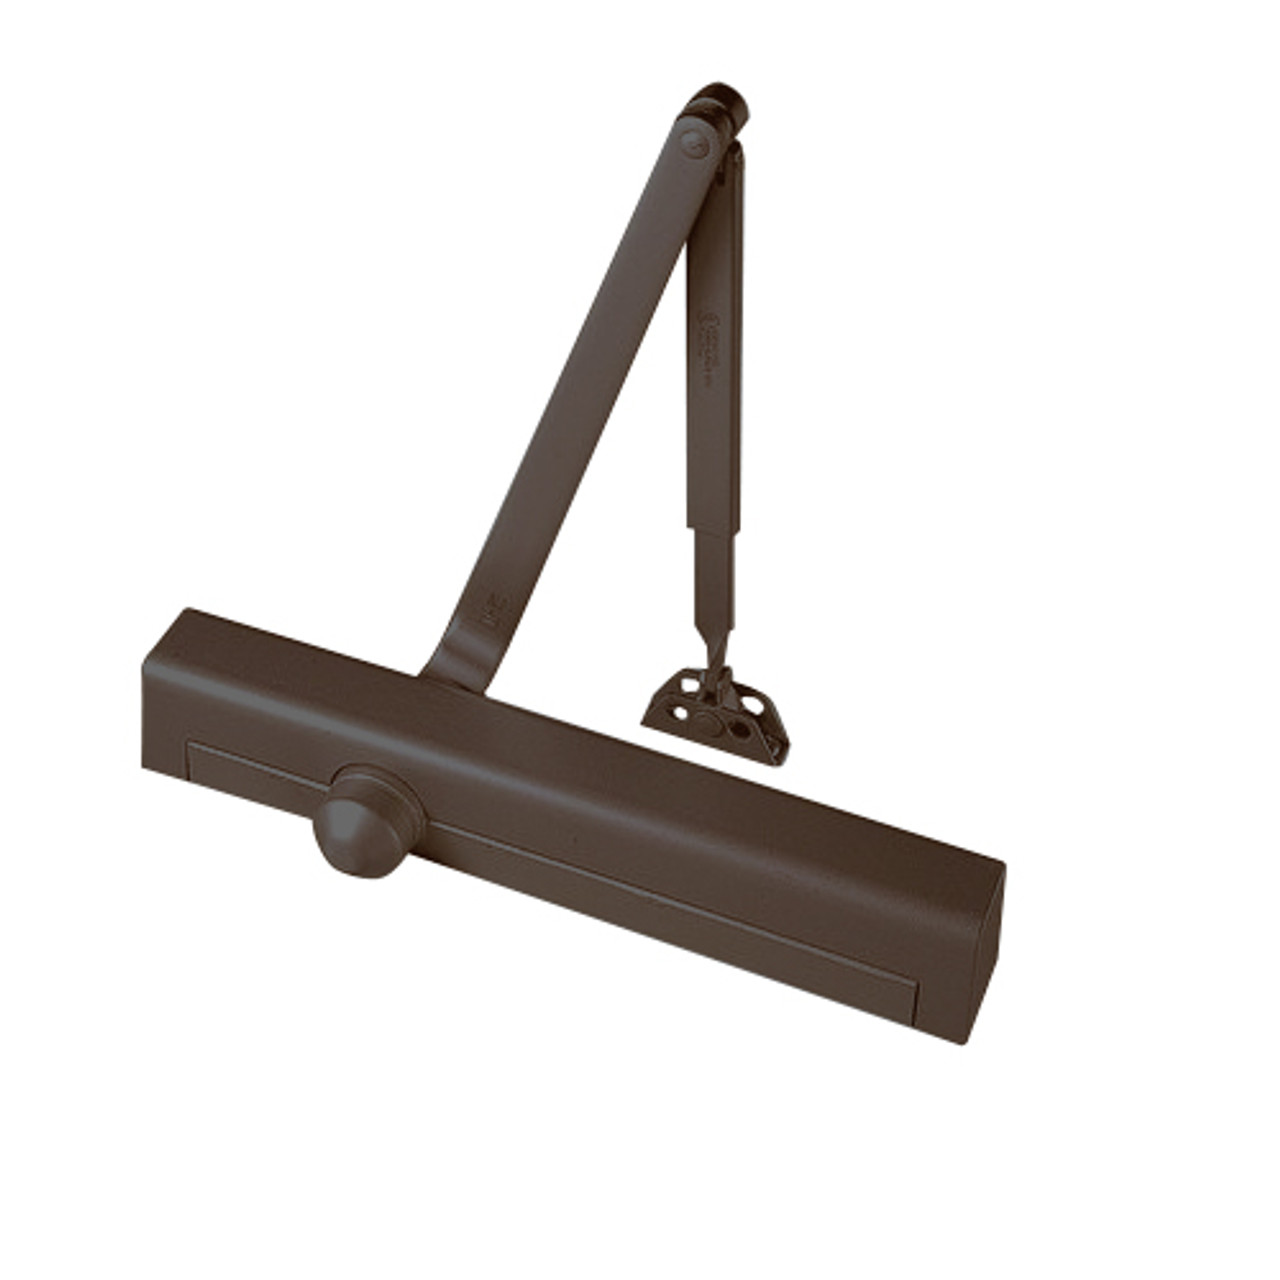 S8301-690 Norton 8000 Series Non-Hold Open Door Closers with Regular Arm Application in Statuary Bronze Finish